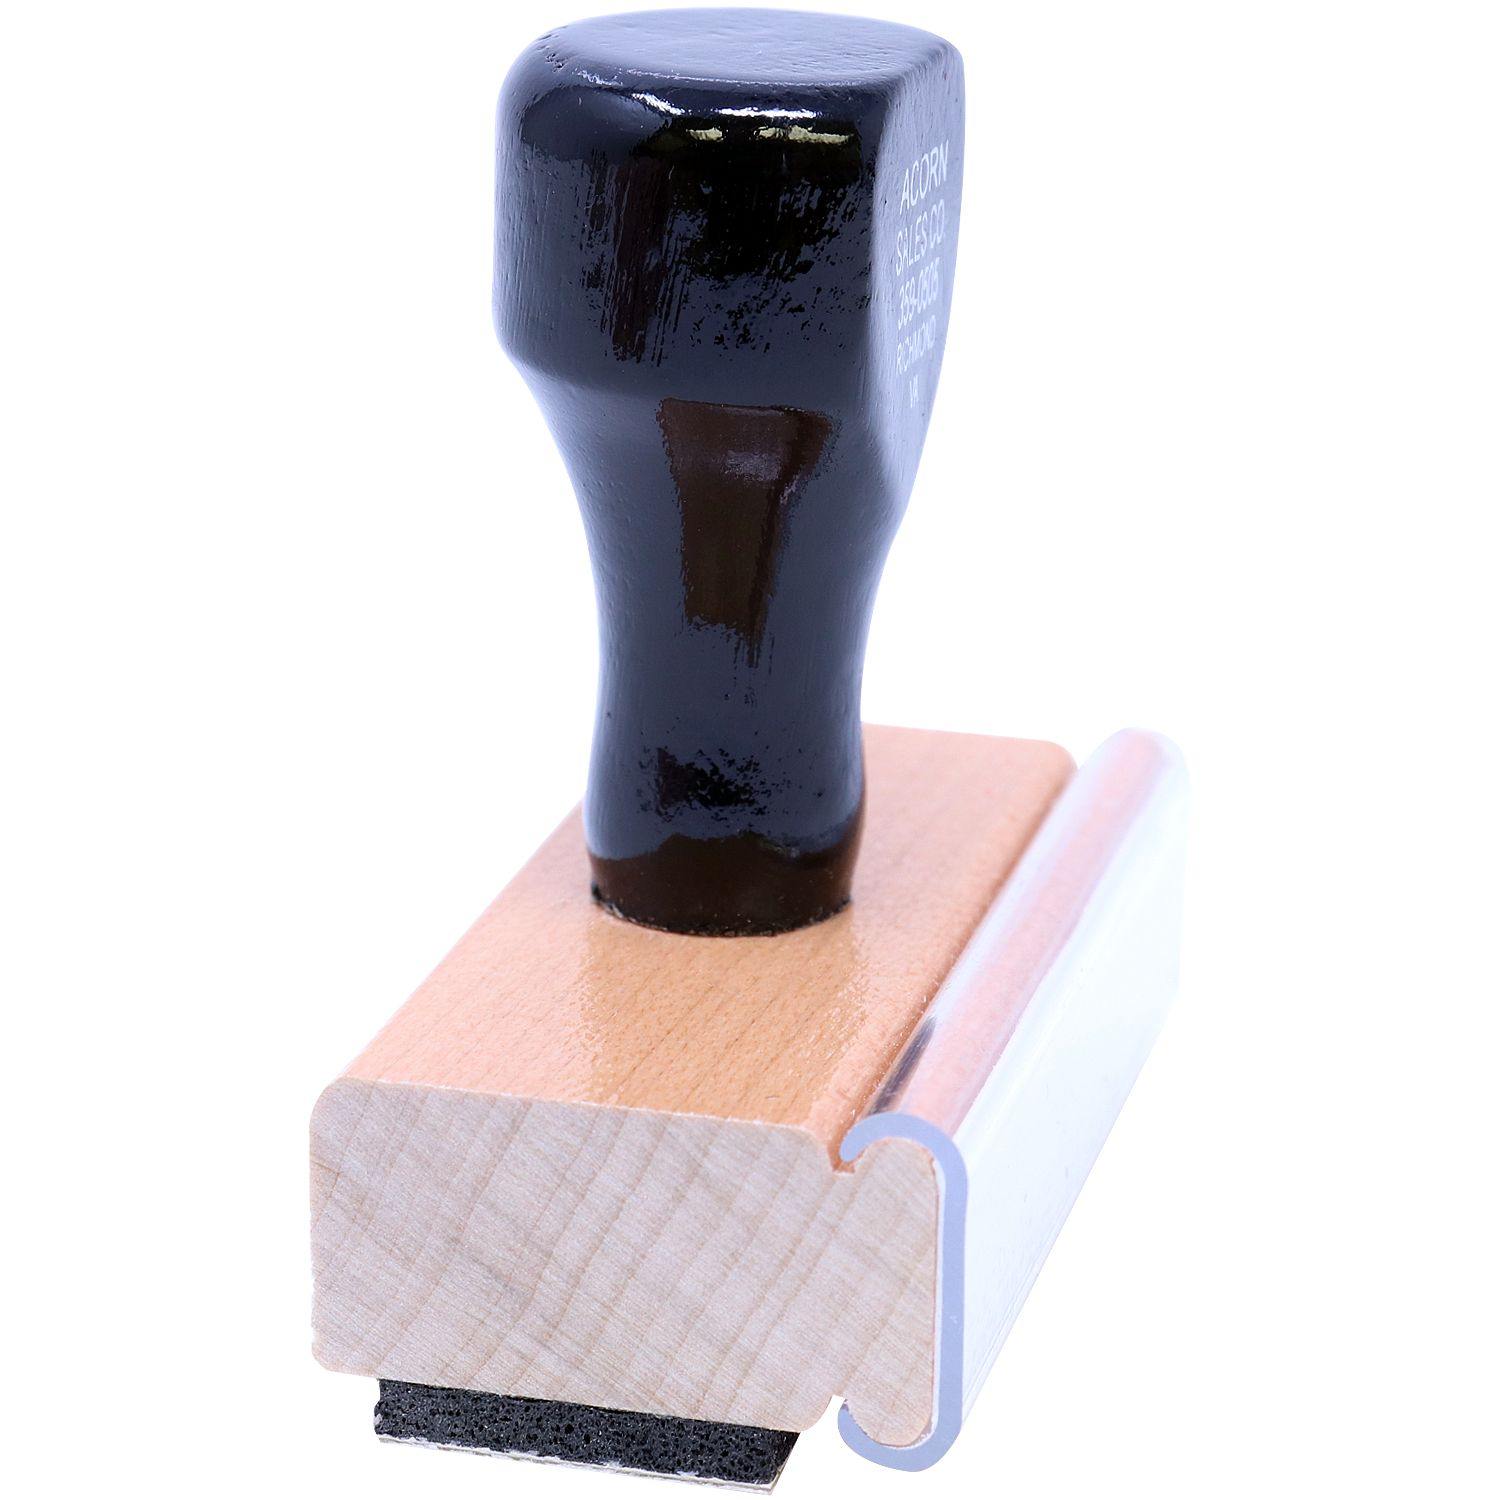 Not Approved For Construction Rubber Stamp - Engineer Seal Stamps - Brand_Acorn, Impression Size_Small, Stamp Type_Regular Stamp, Type of Use_Professional